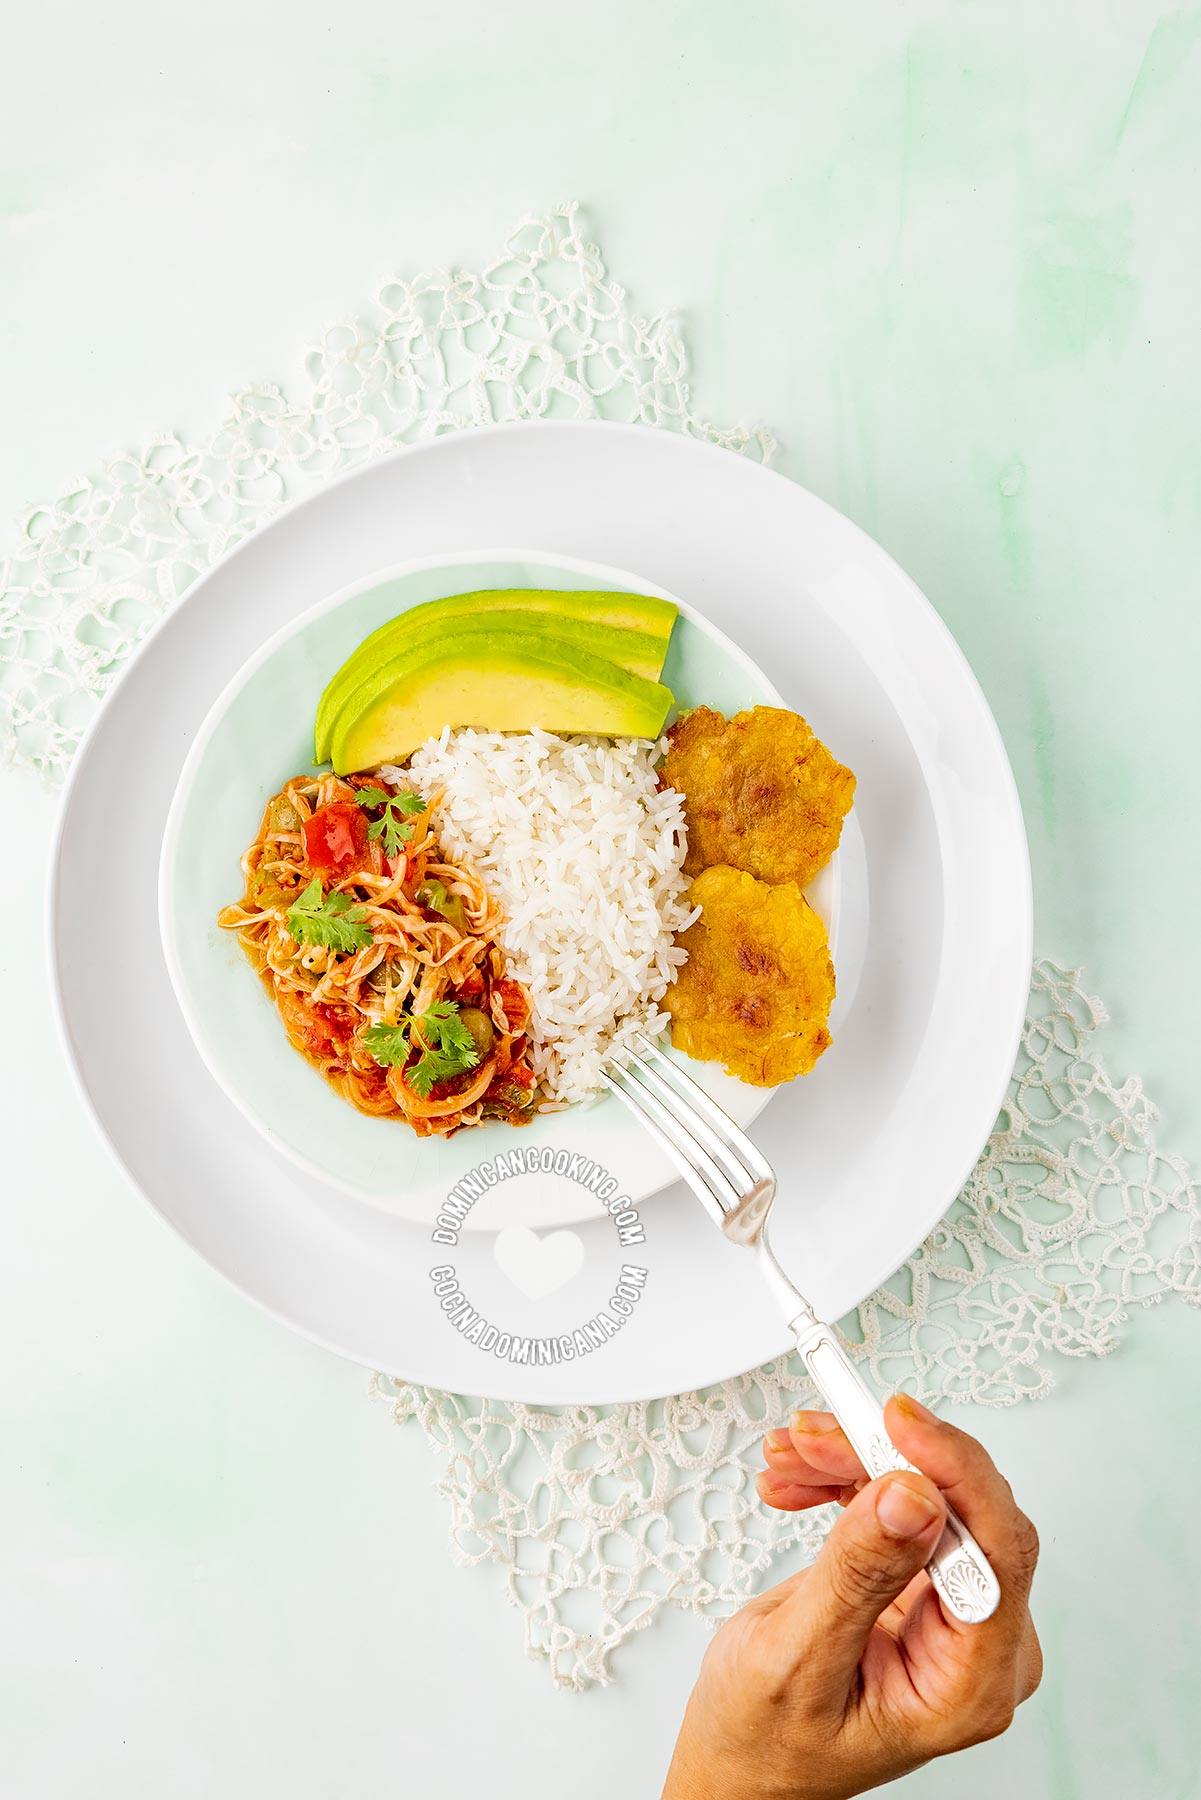 Repollo guisado (stewed cabbage) served with rice and avocado.